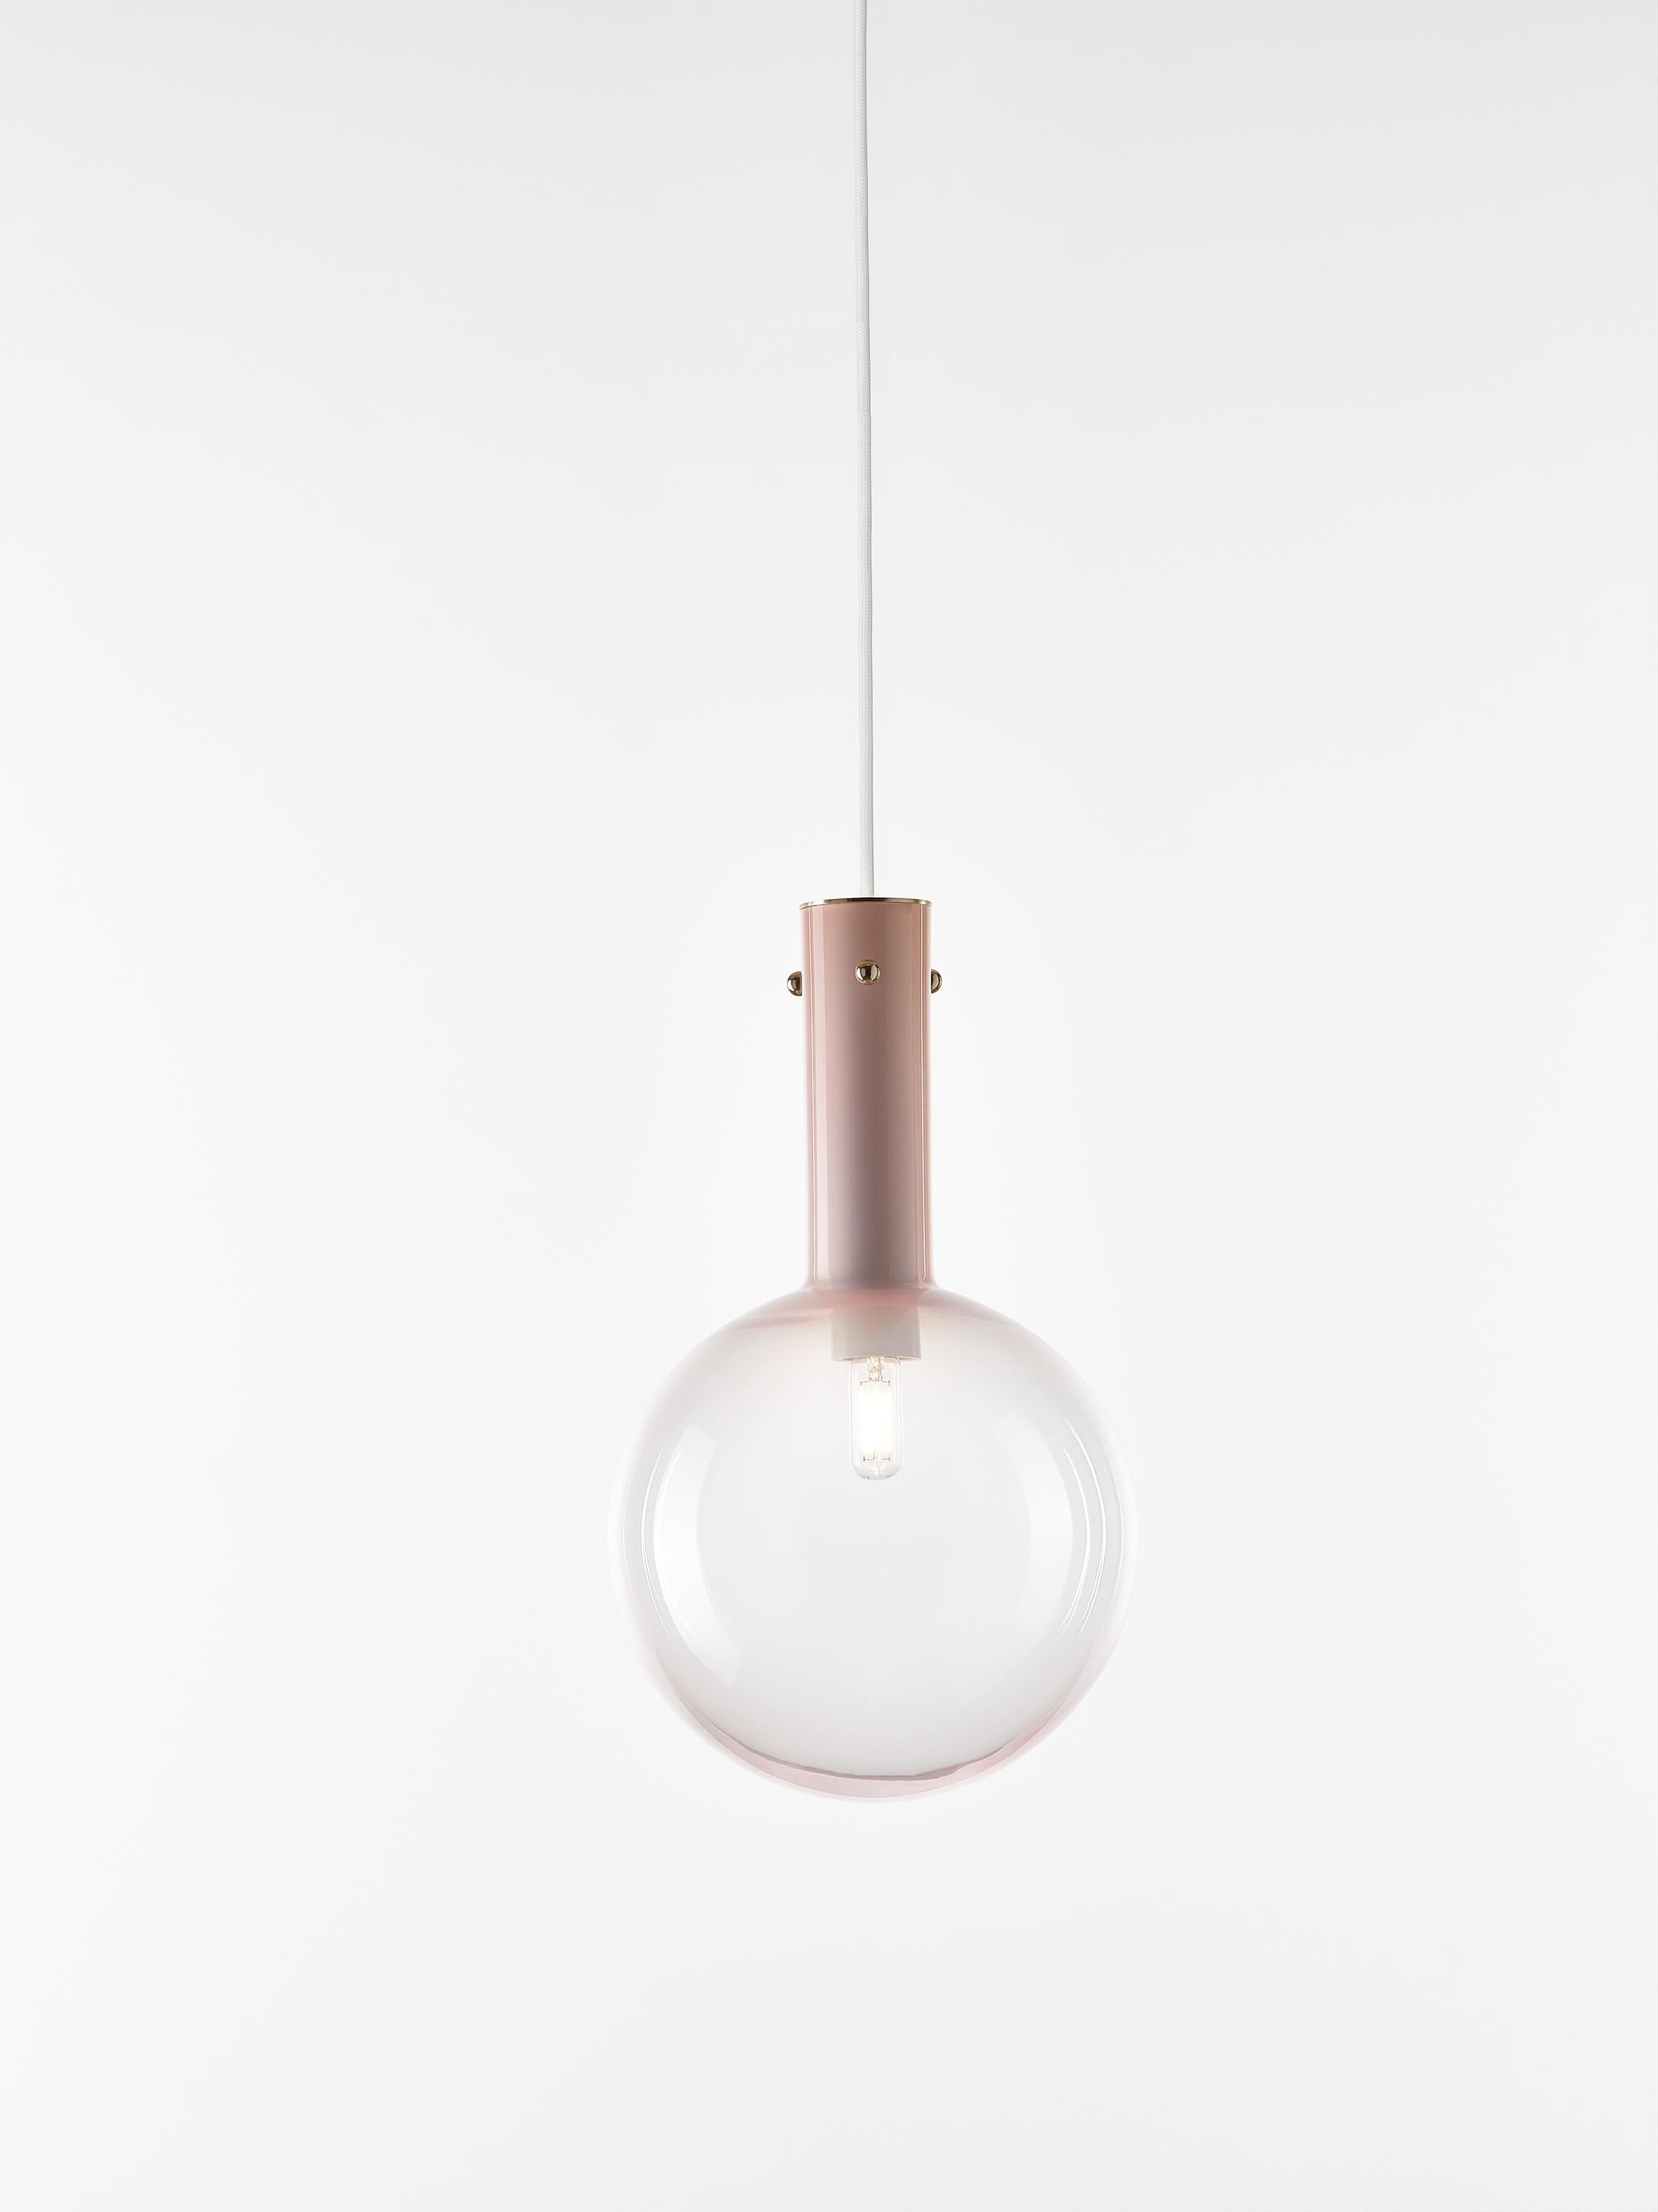 Set of 2 pink Sphaerae pendant Lights by Dechem Studio
Dimensions: D 20 x H 180 cm.
Materials: brass, metal, glass.
Also available: different finishes and colours available.

Only one homogenous piece of hand-blown glass creates the main body